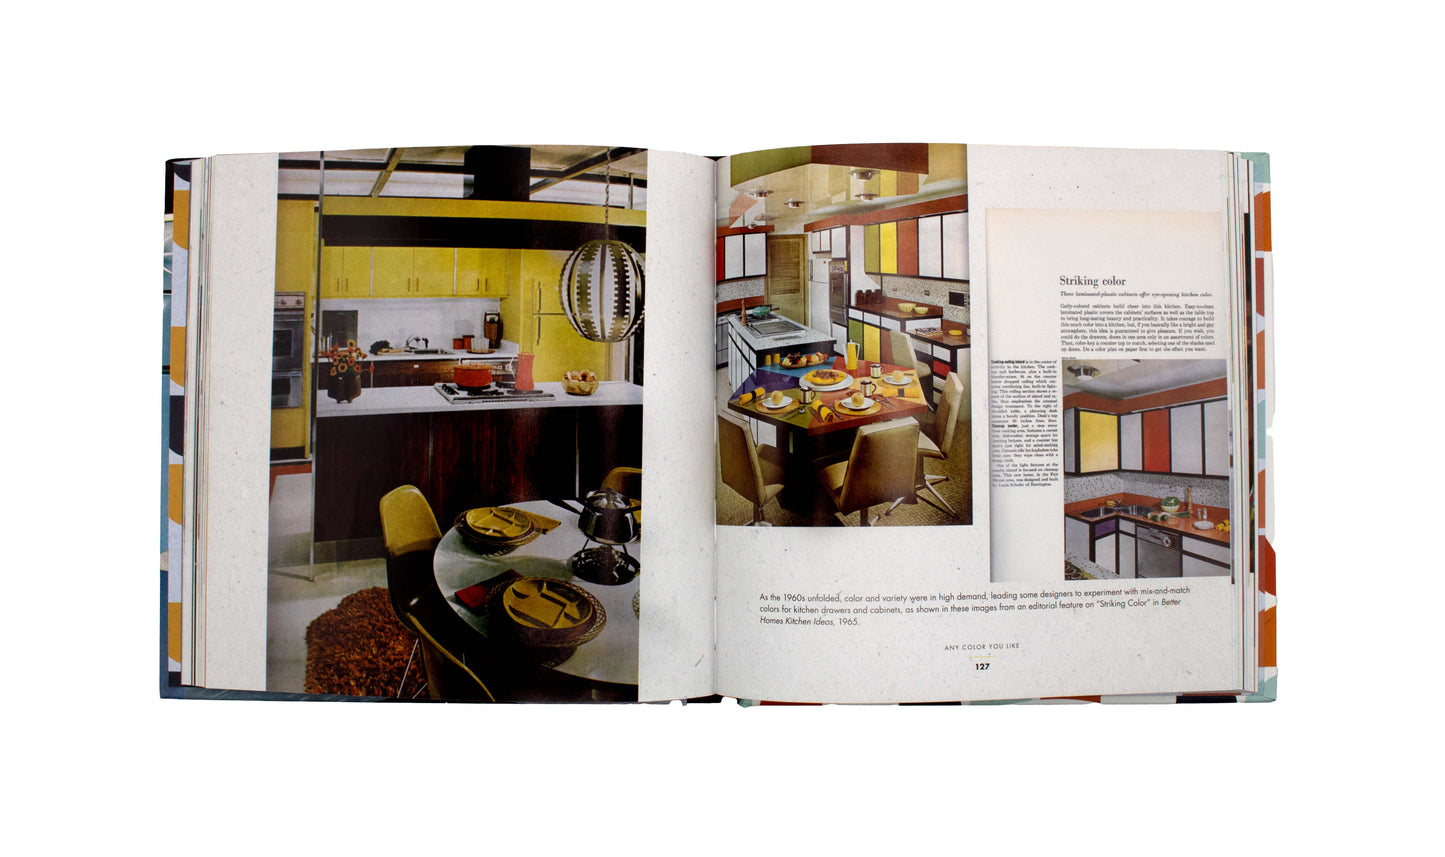 The Midcentury Kitchen: America's Favorite Room, from Workspace to Dreamscape, 1940s-1970s